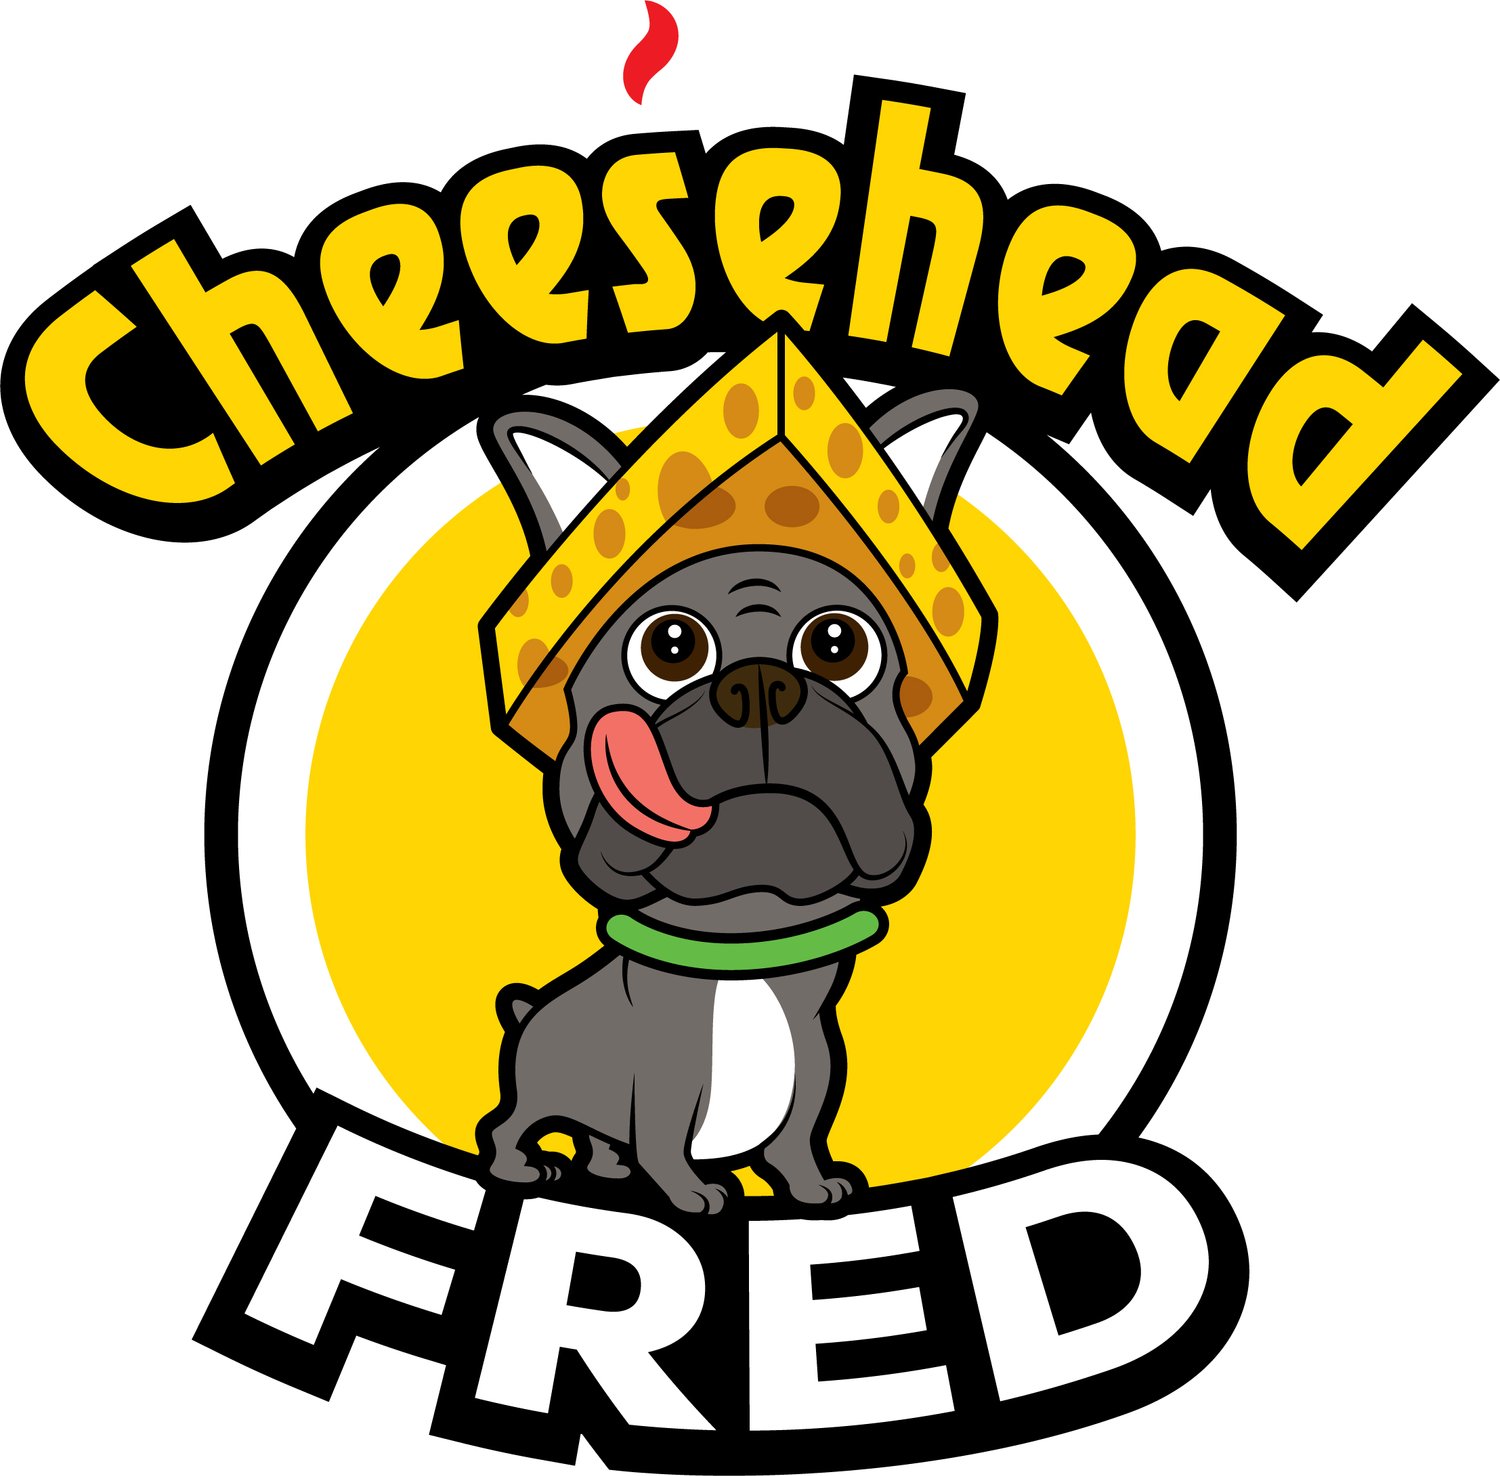 Cheesehead Fred